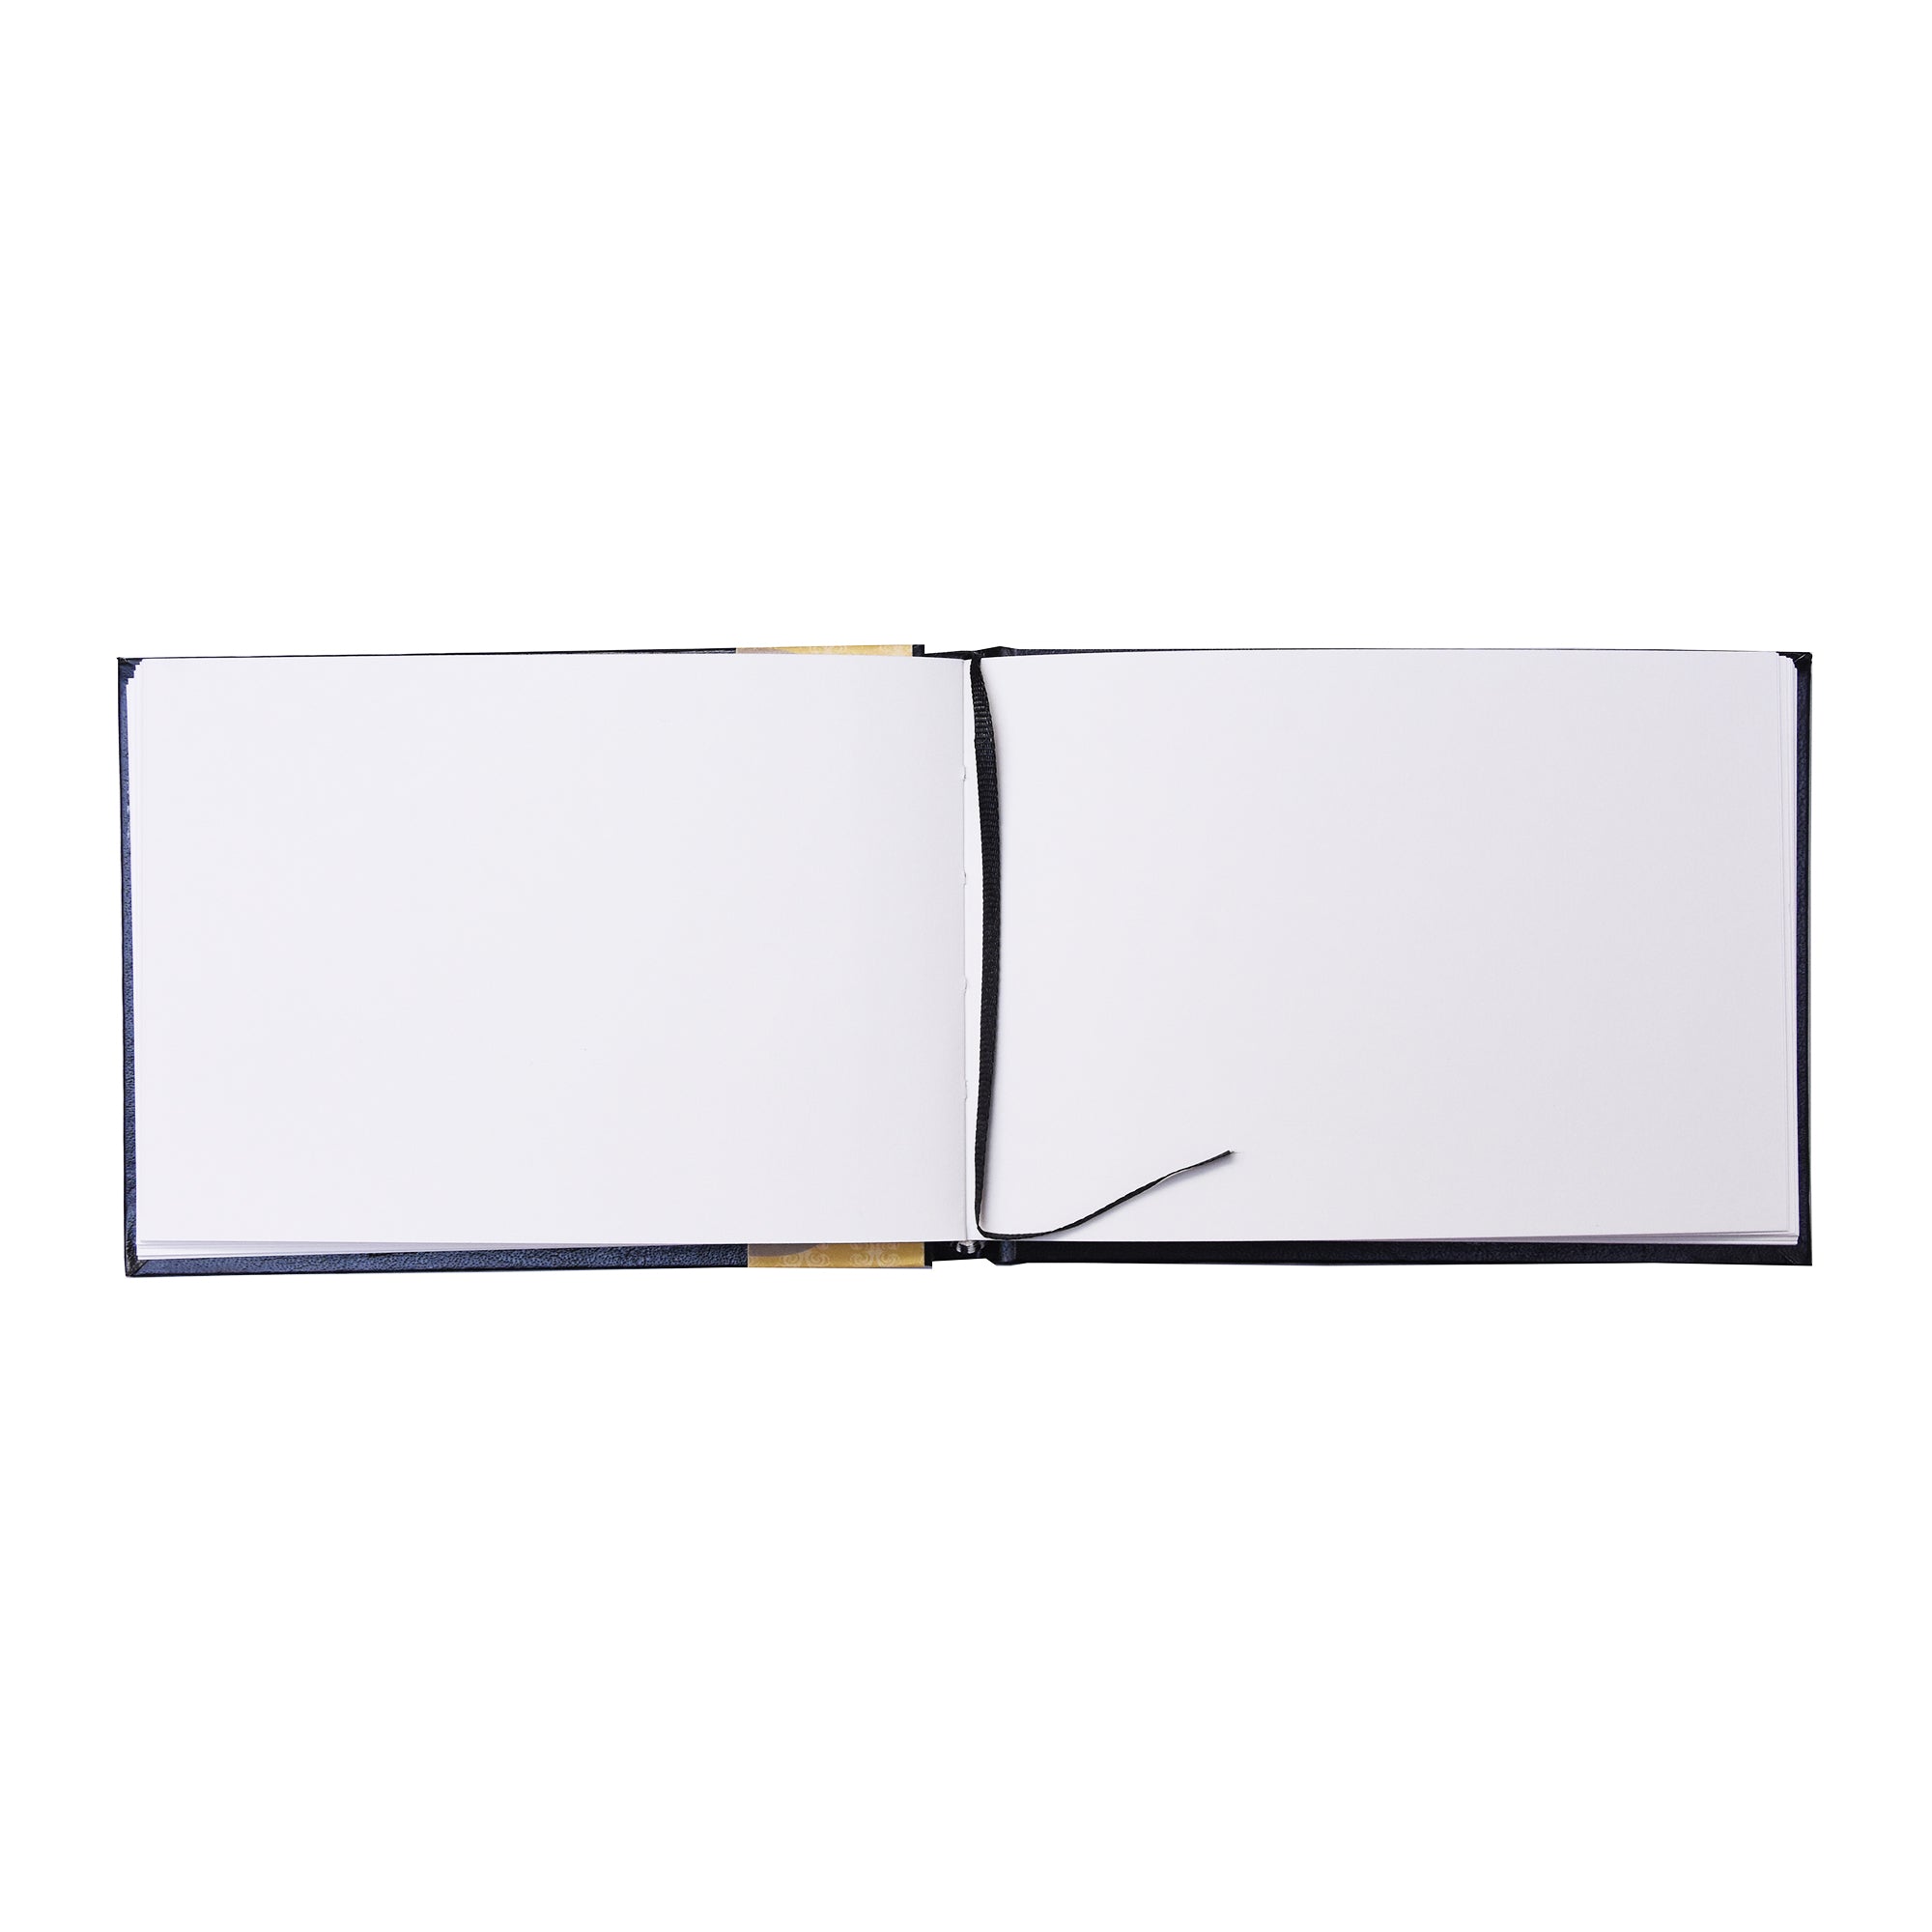 Sketch Drawing Book Hard Bound A6 140Gsm 96Pages An